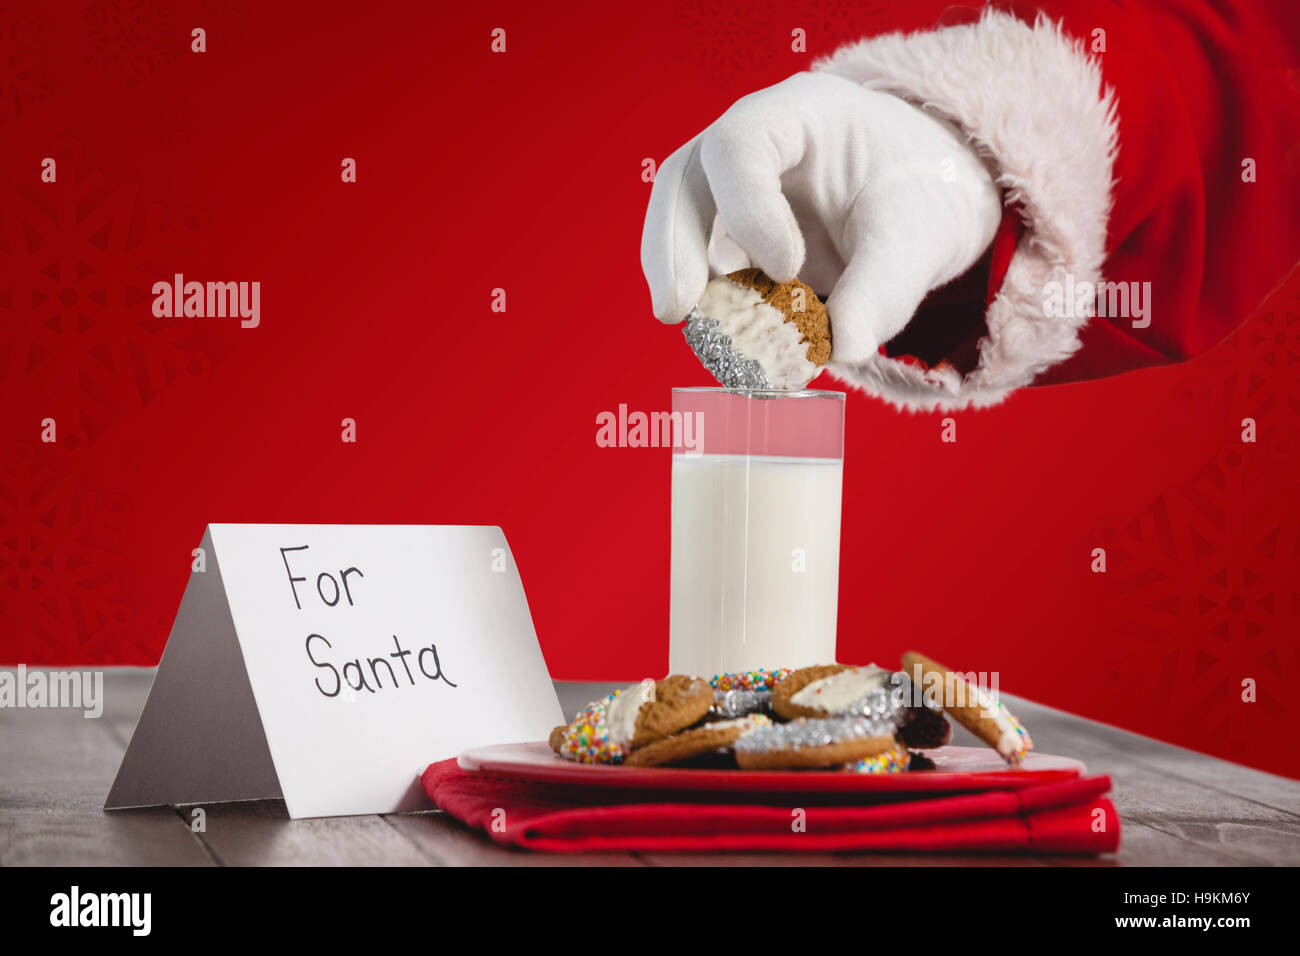 Composite image of cropped image of santa claus dipping cookies in glass of milk Stock Photo